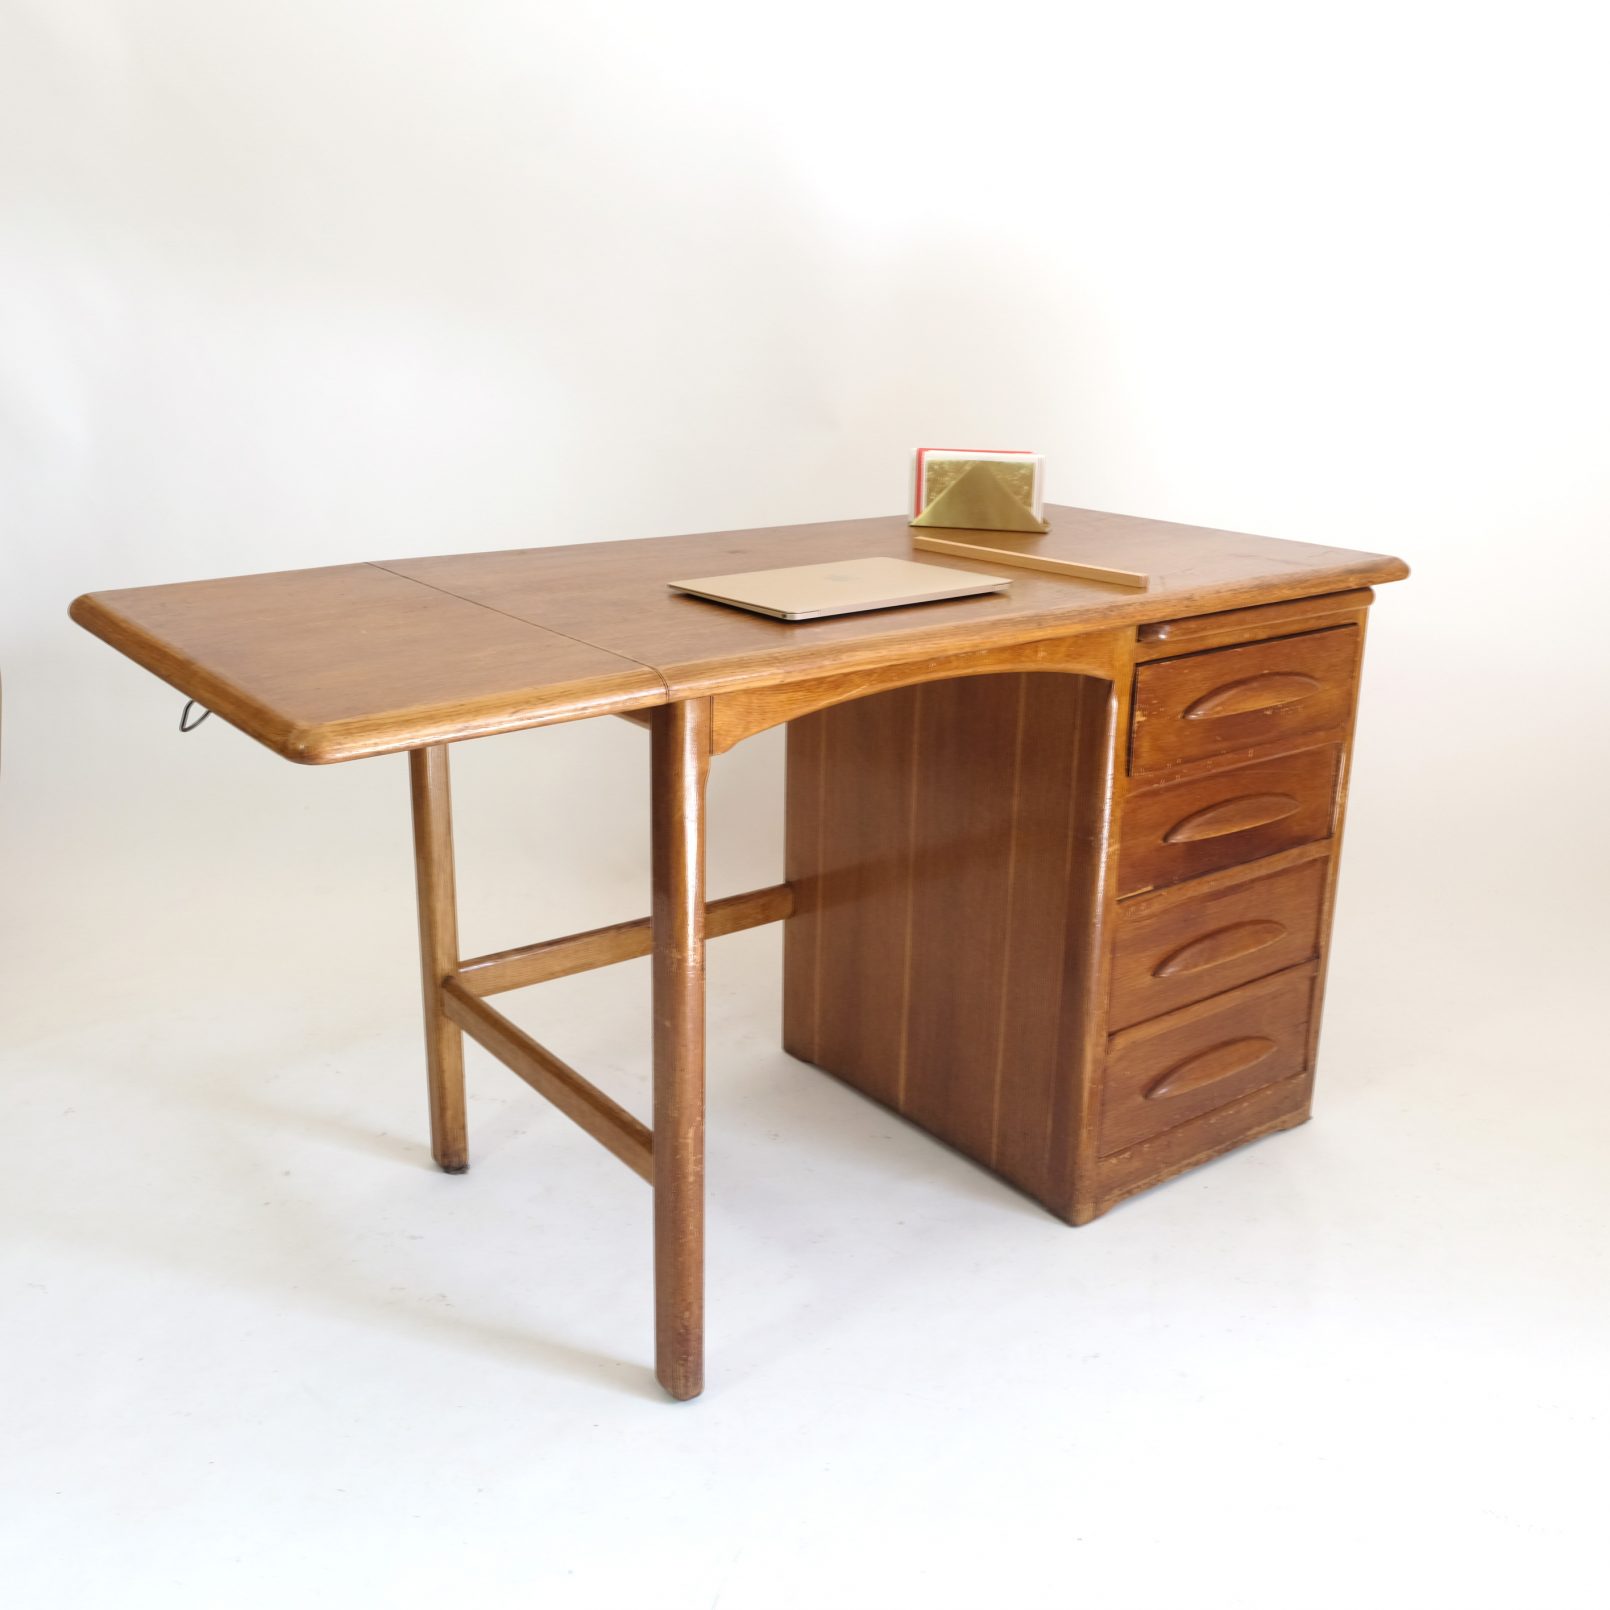 Desk with an extending leaf from the fifties.